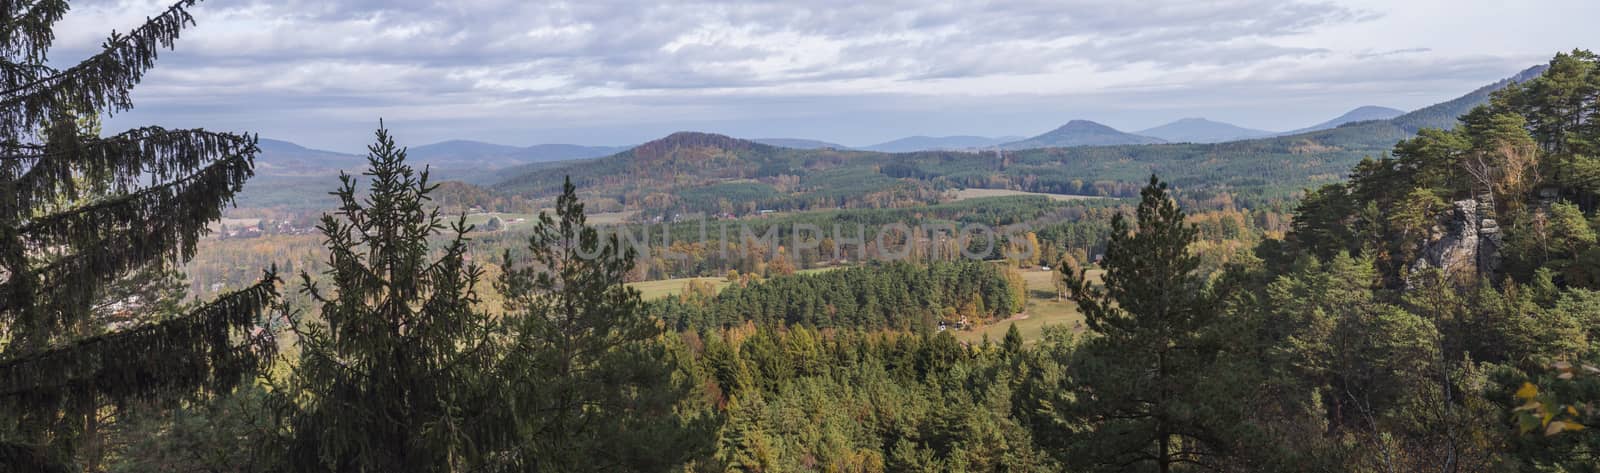 Panoramic view from Hrabencina vyhlidka on village Sloup v cechach in luzicke hory, Lusatian Mountains with autumn colored deciduous and coniferous tree forest and green hills, blue sky, white clouds.